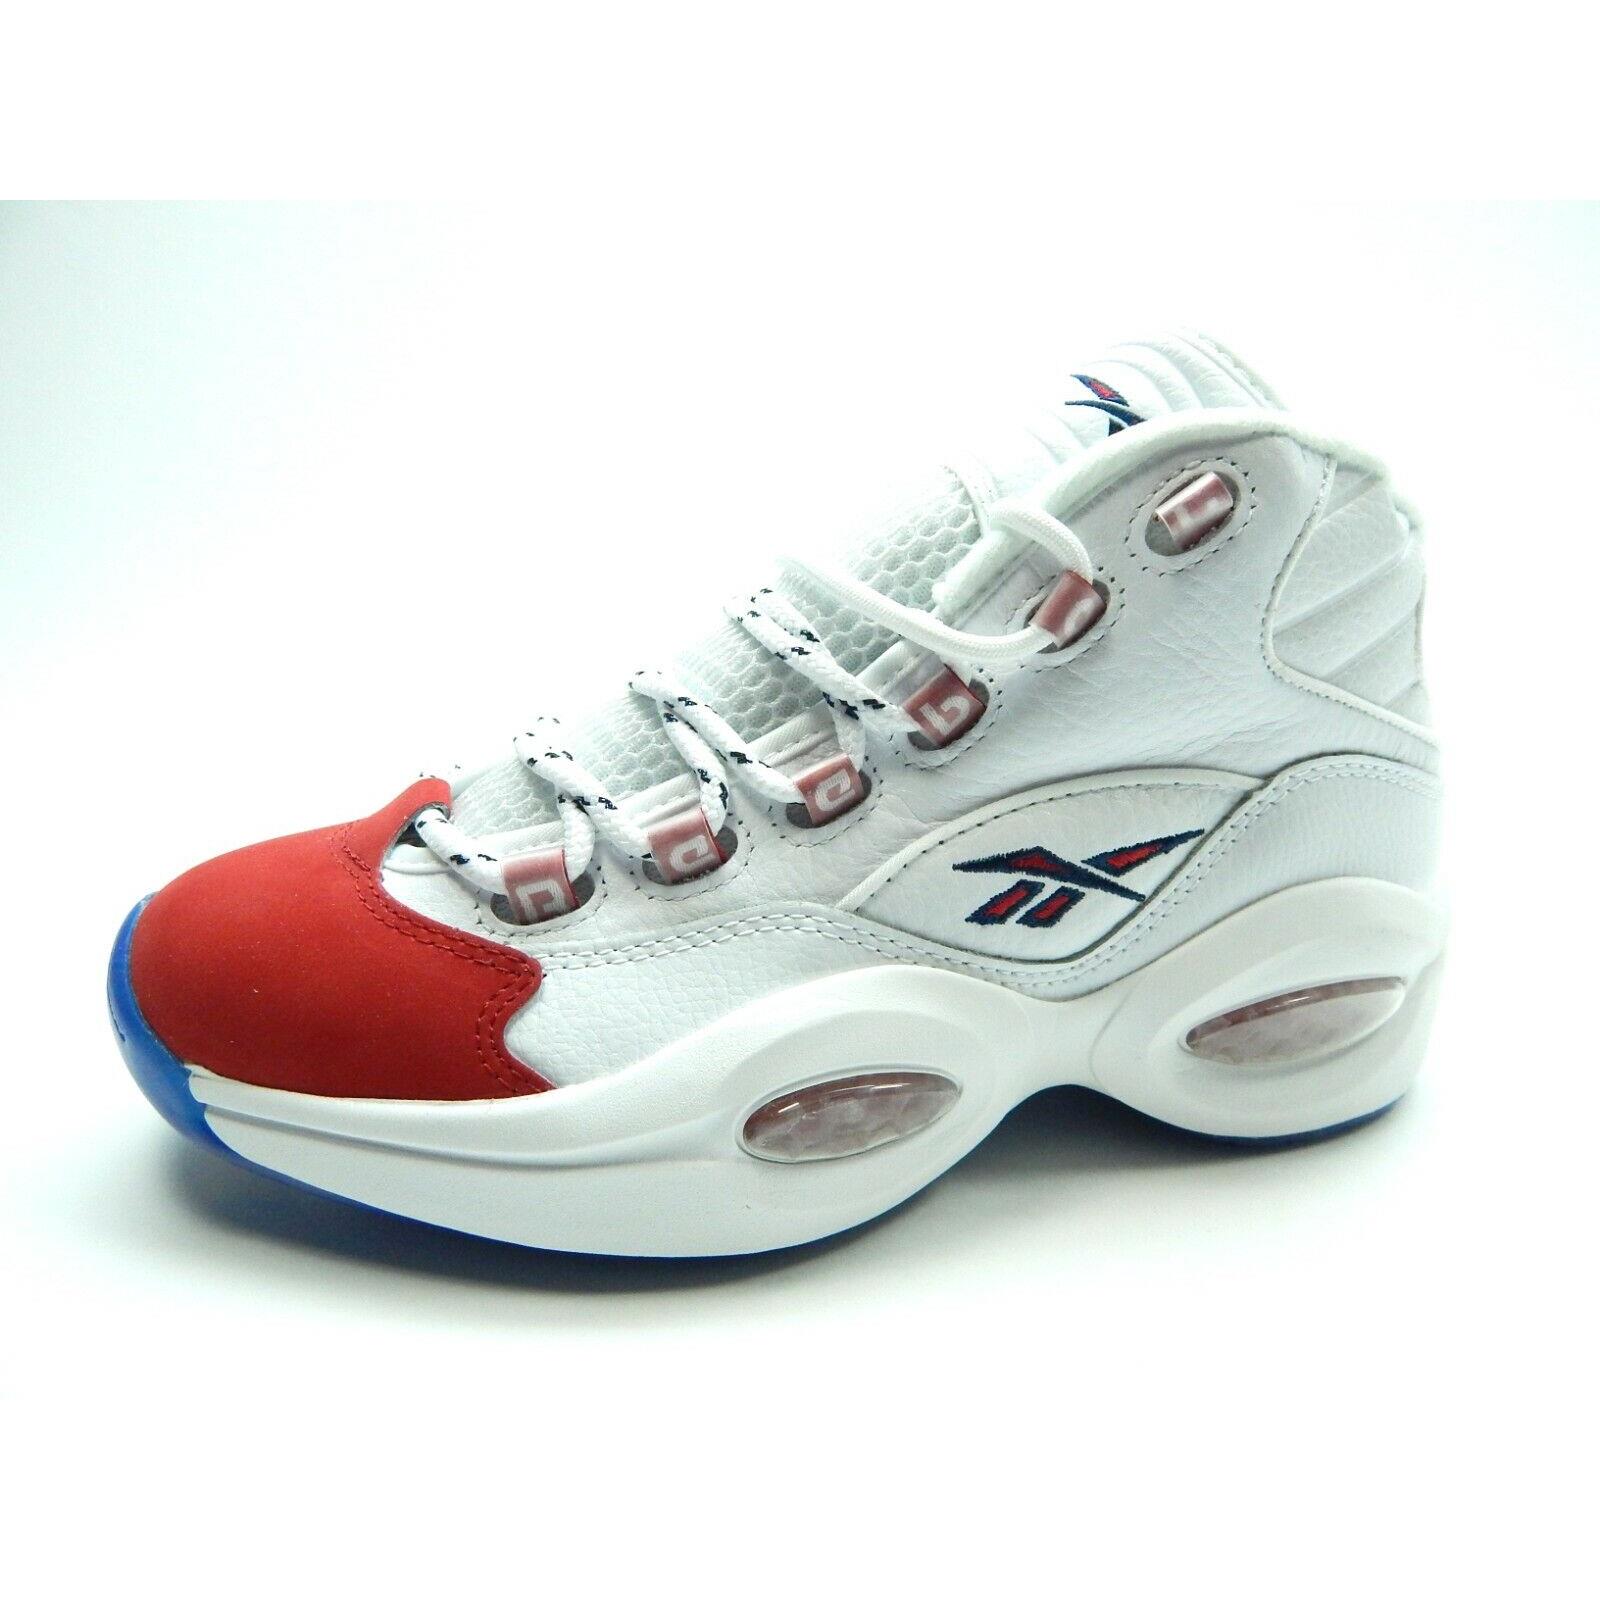 Reebok Question Mid Basketball White Red Blue FY1018 Men Shoes Size 6